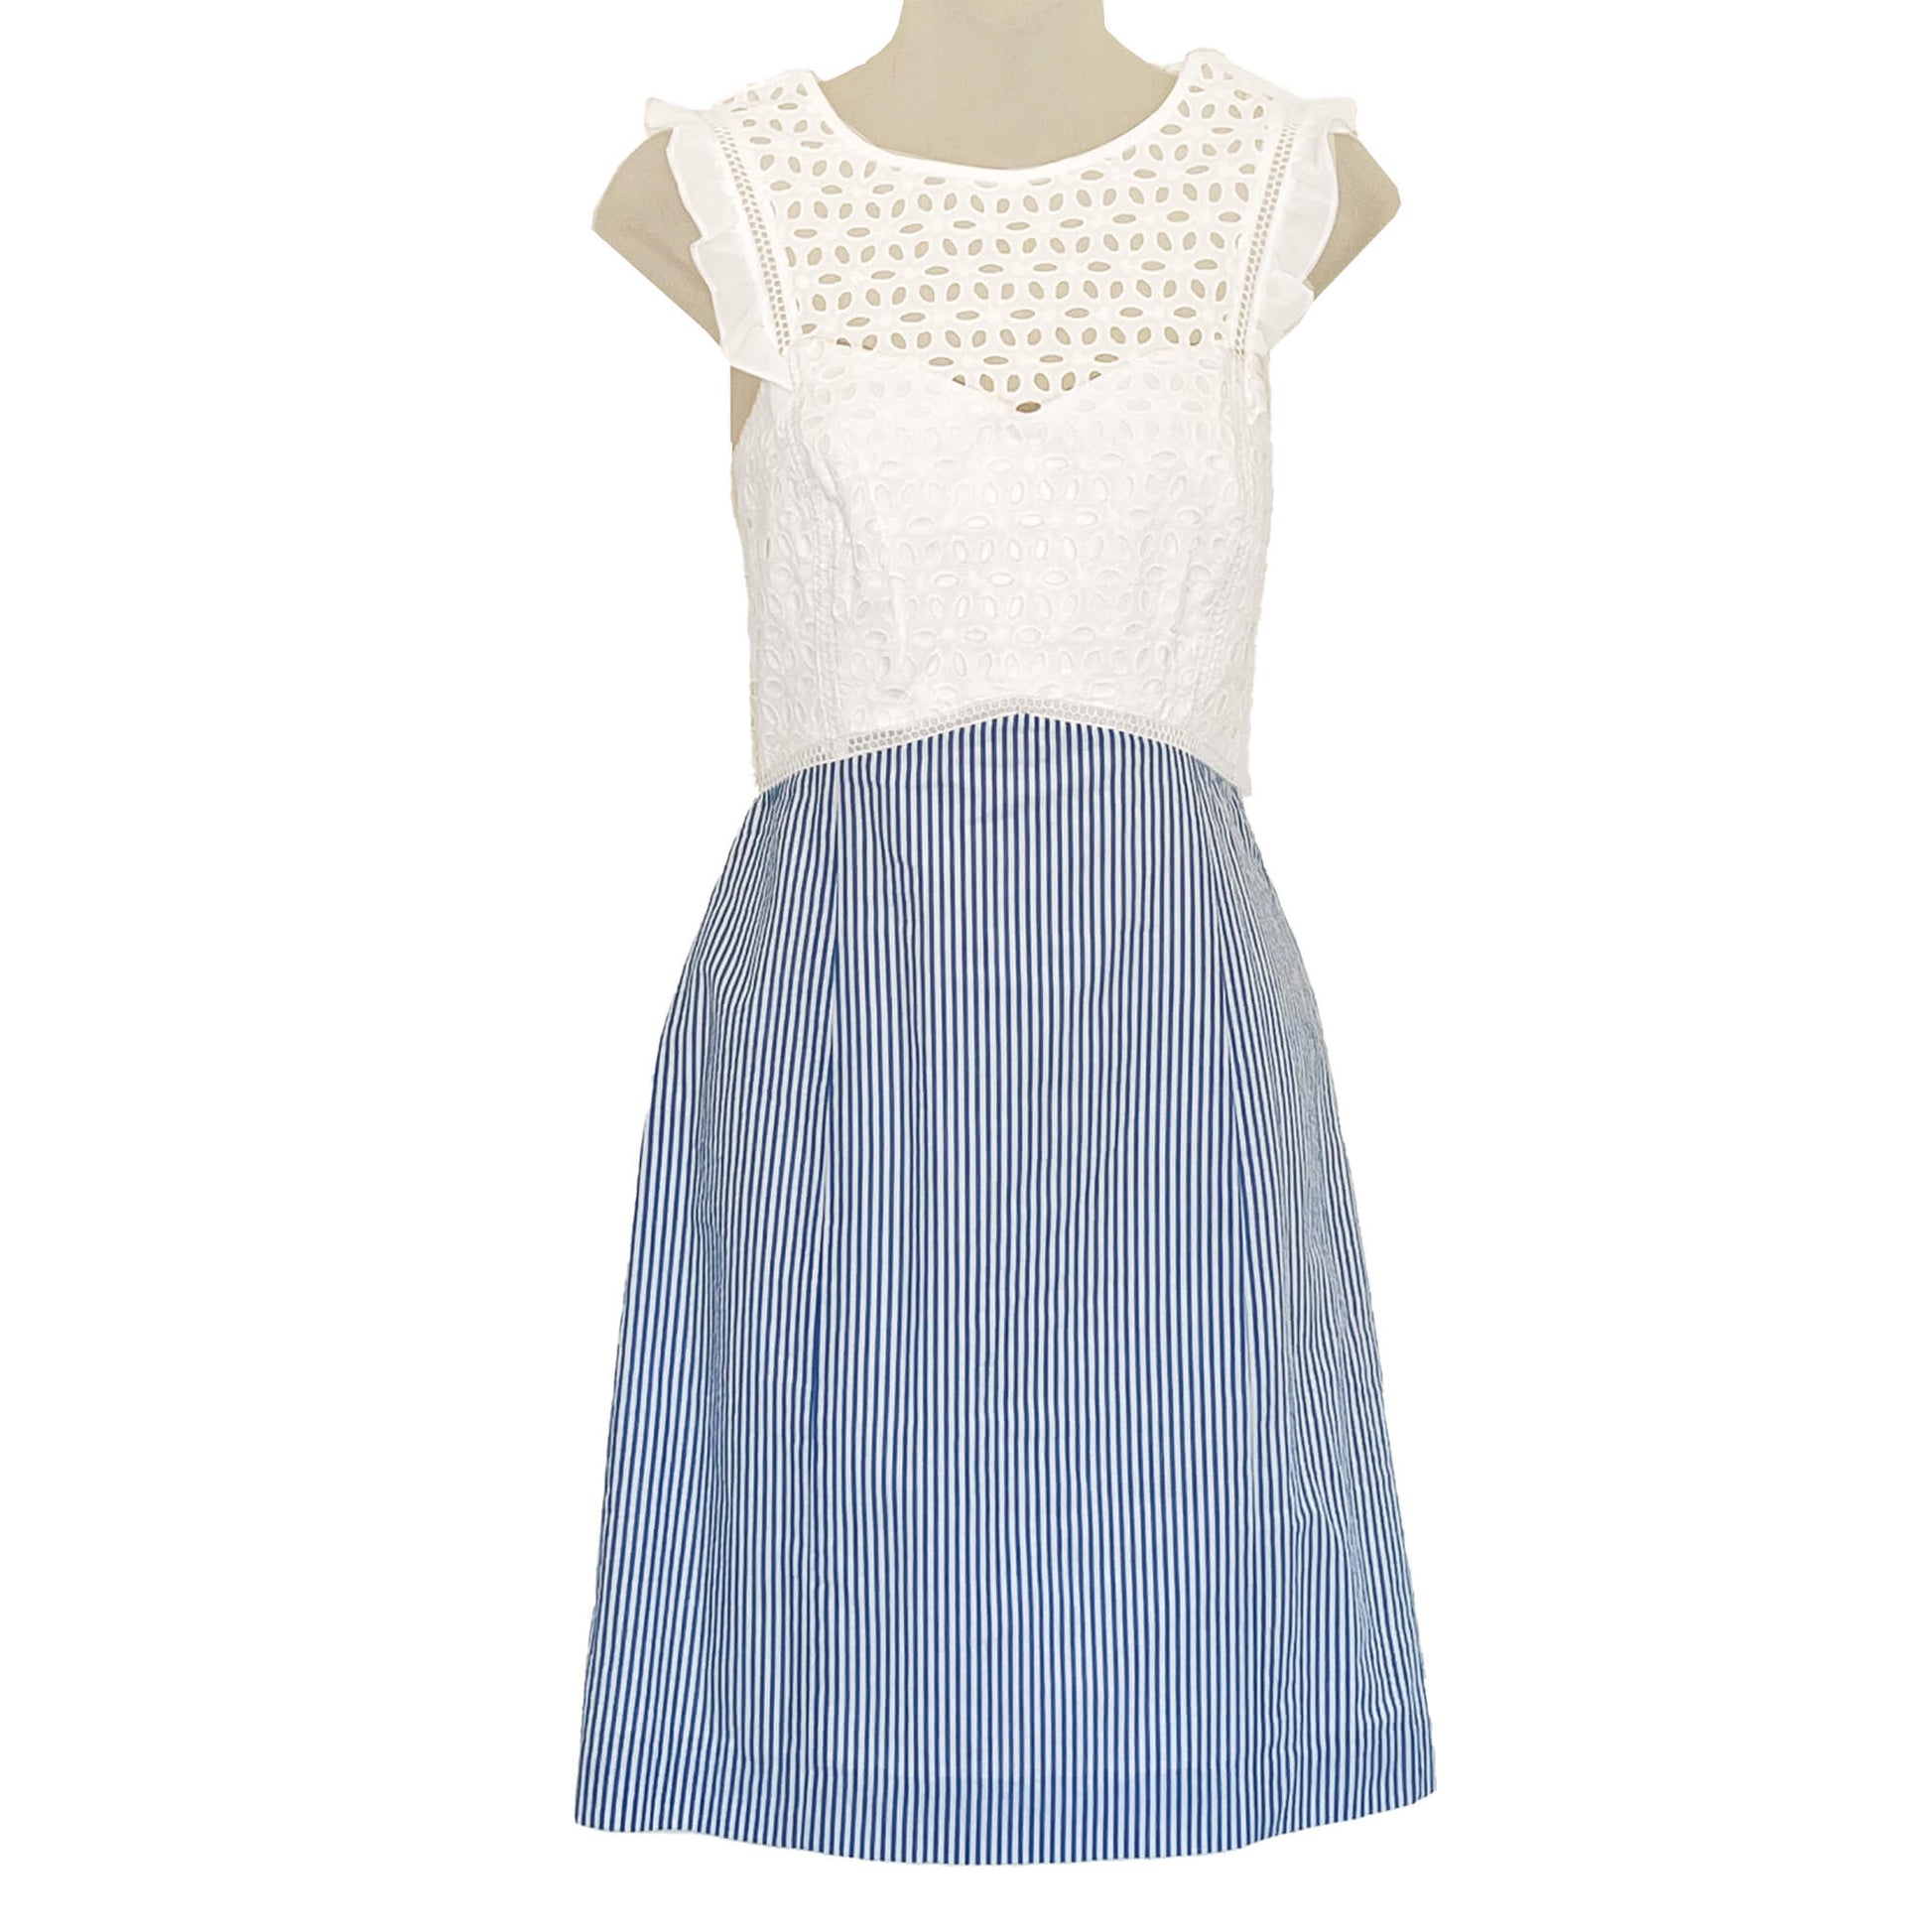 NWT-Lilly-Pulitzer-White-Eyelet_-Blue-Stripe-Dress.-Front-side-3-view.-Size-4.-www.eBargainsAndDeals.com